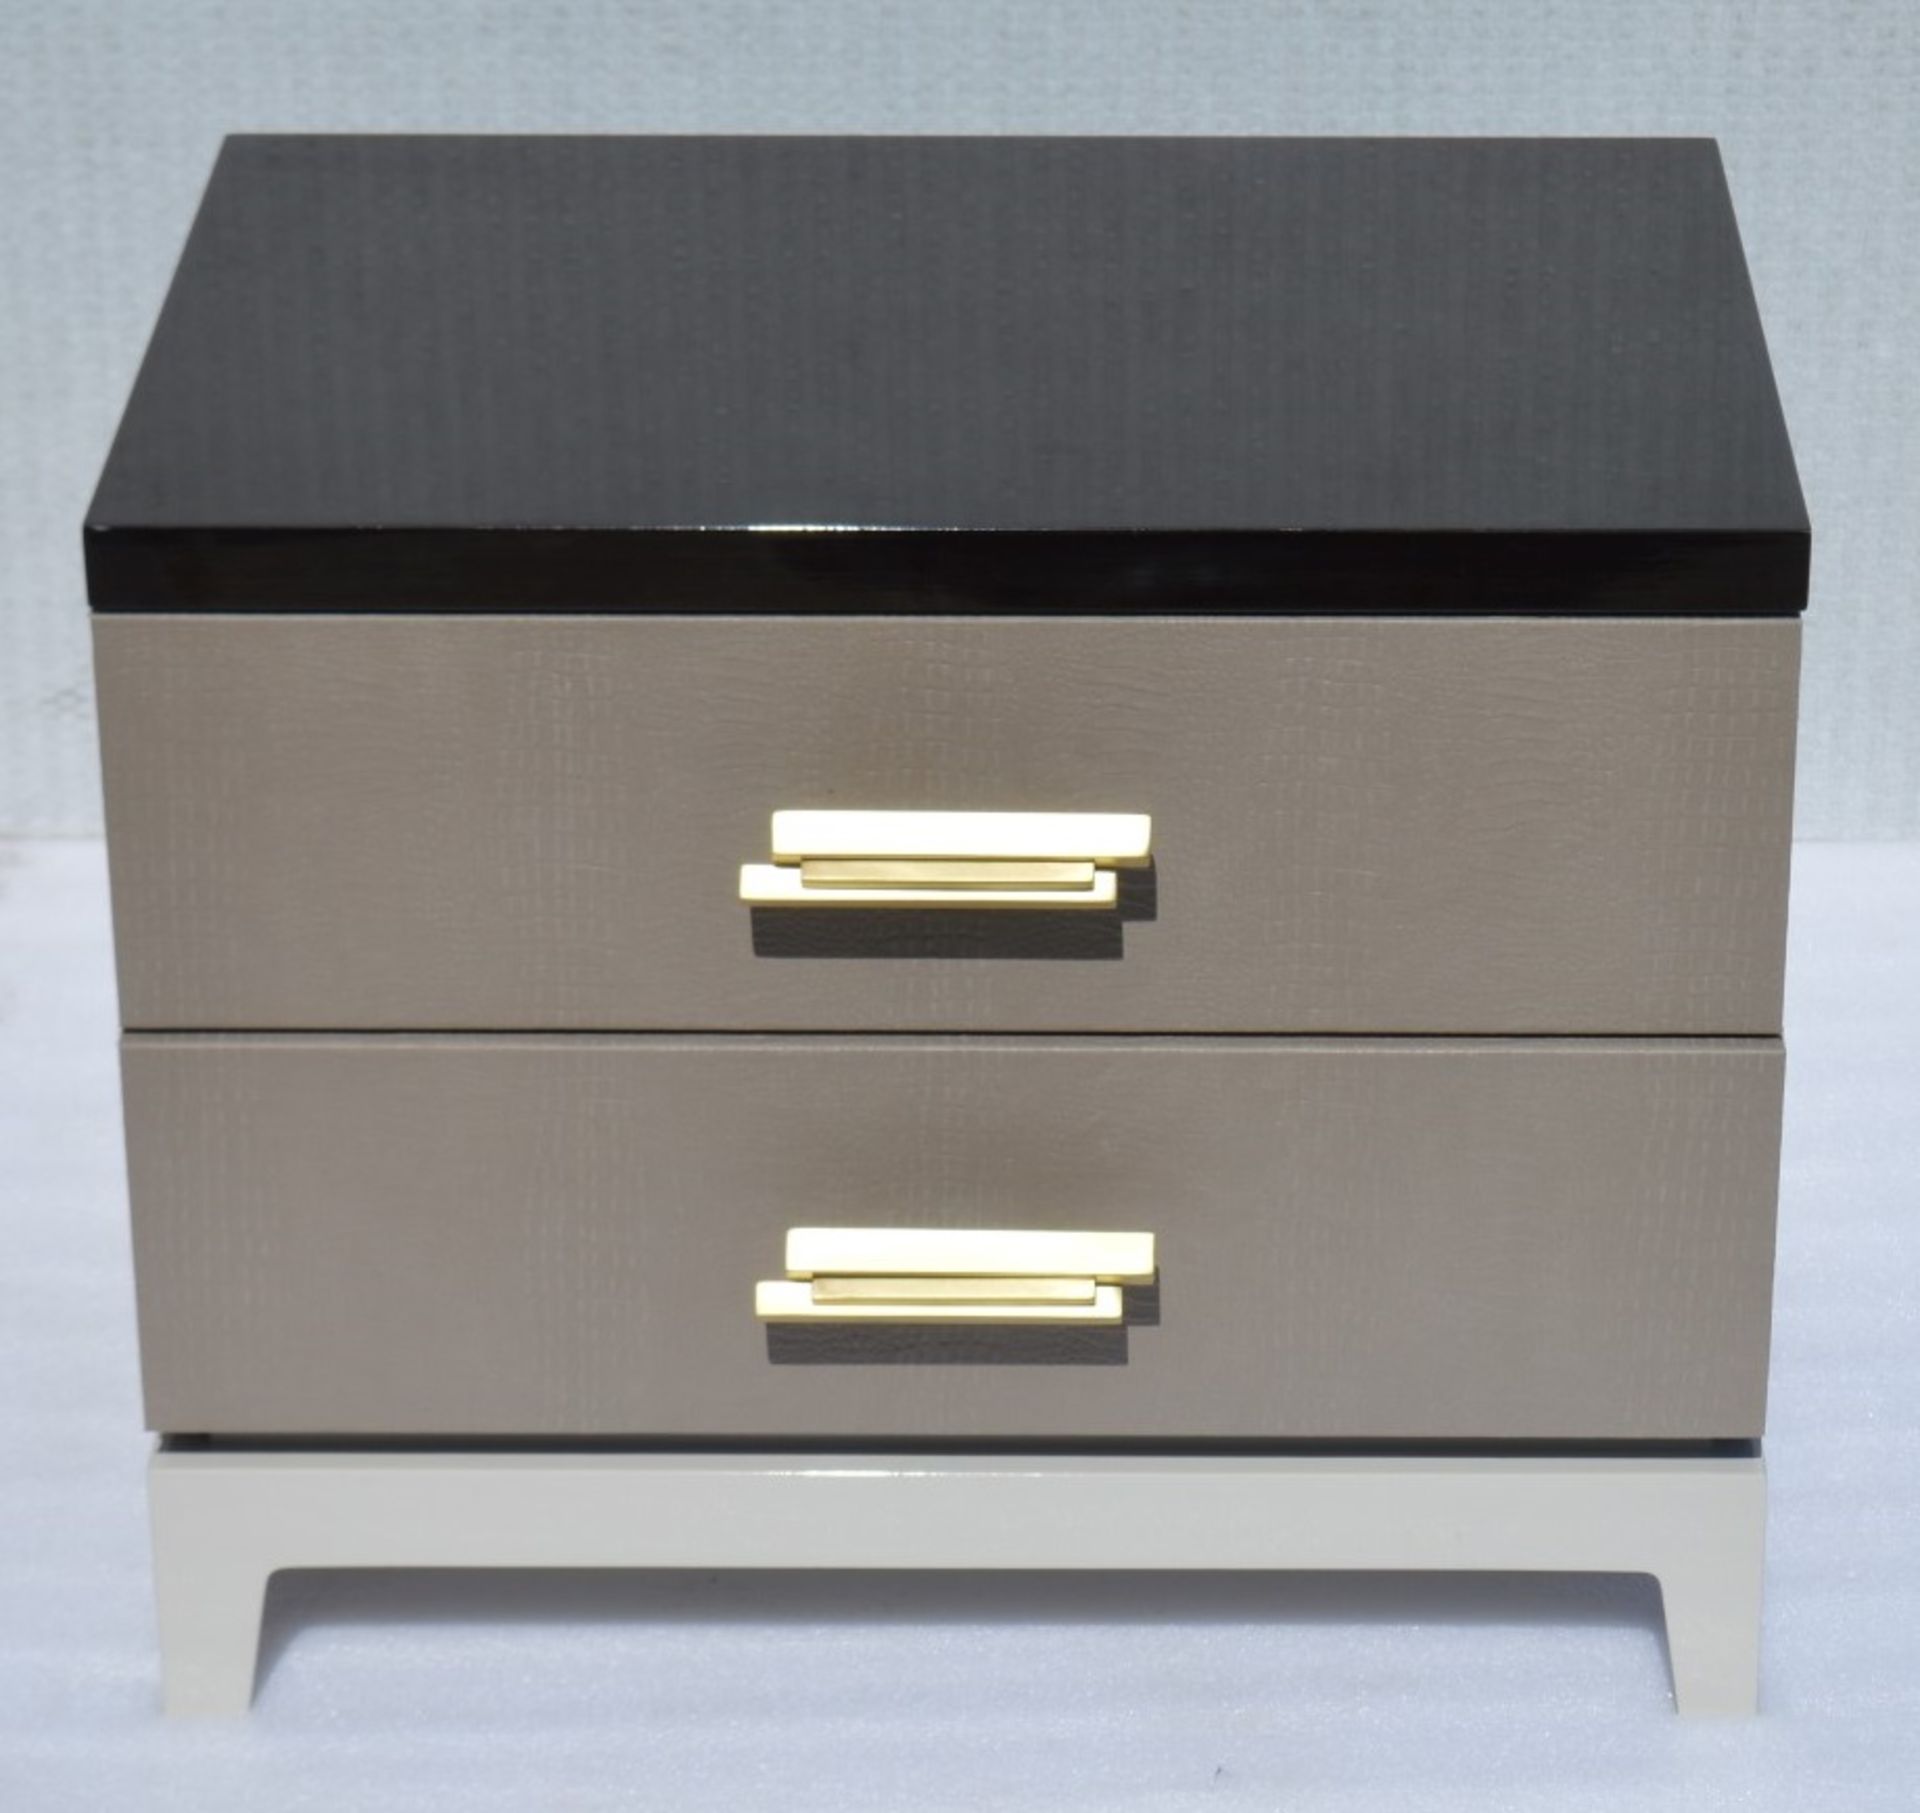 1 x Designer 2-Drawer Small Bedside Unit (Black/gold) With Crocodile Effect Drawers, Ornate Handles